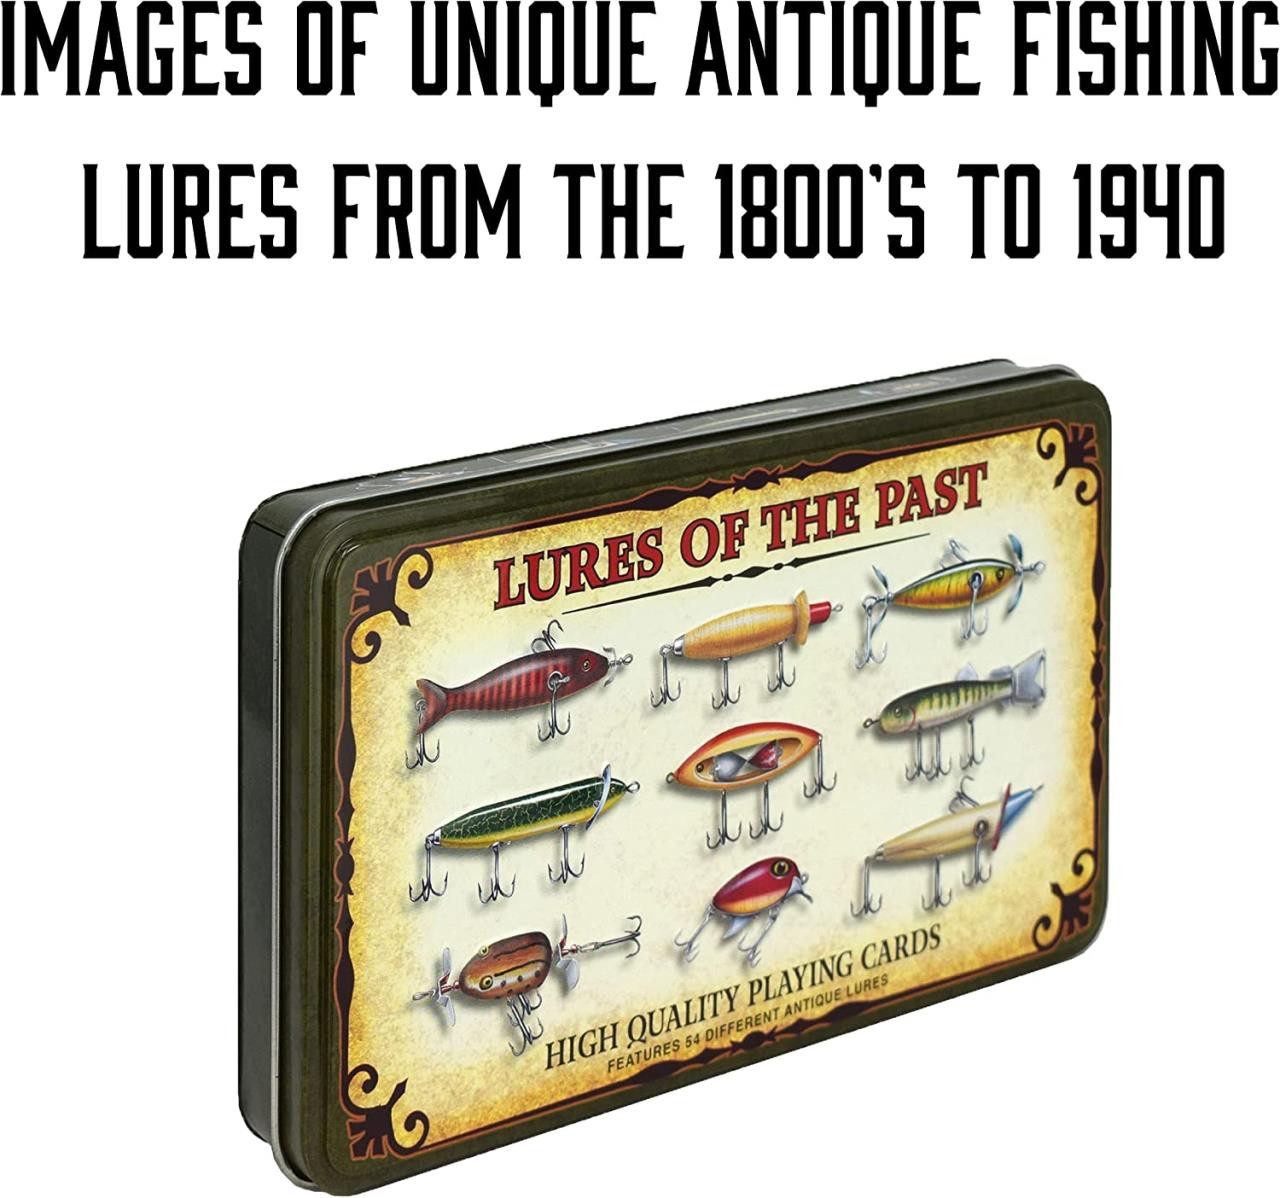 Buy Fishing Lures Playing Cards Deck Lure of The Past 54 Antique